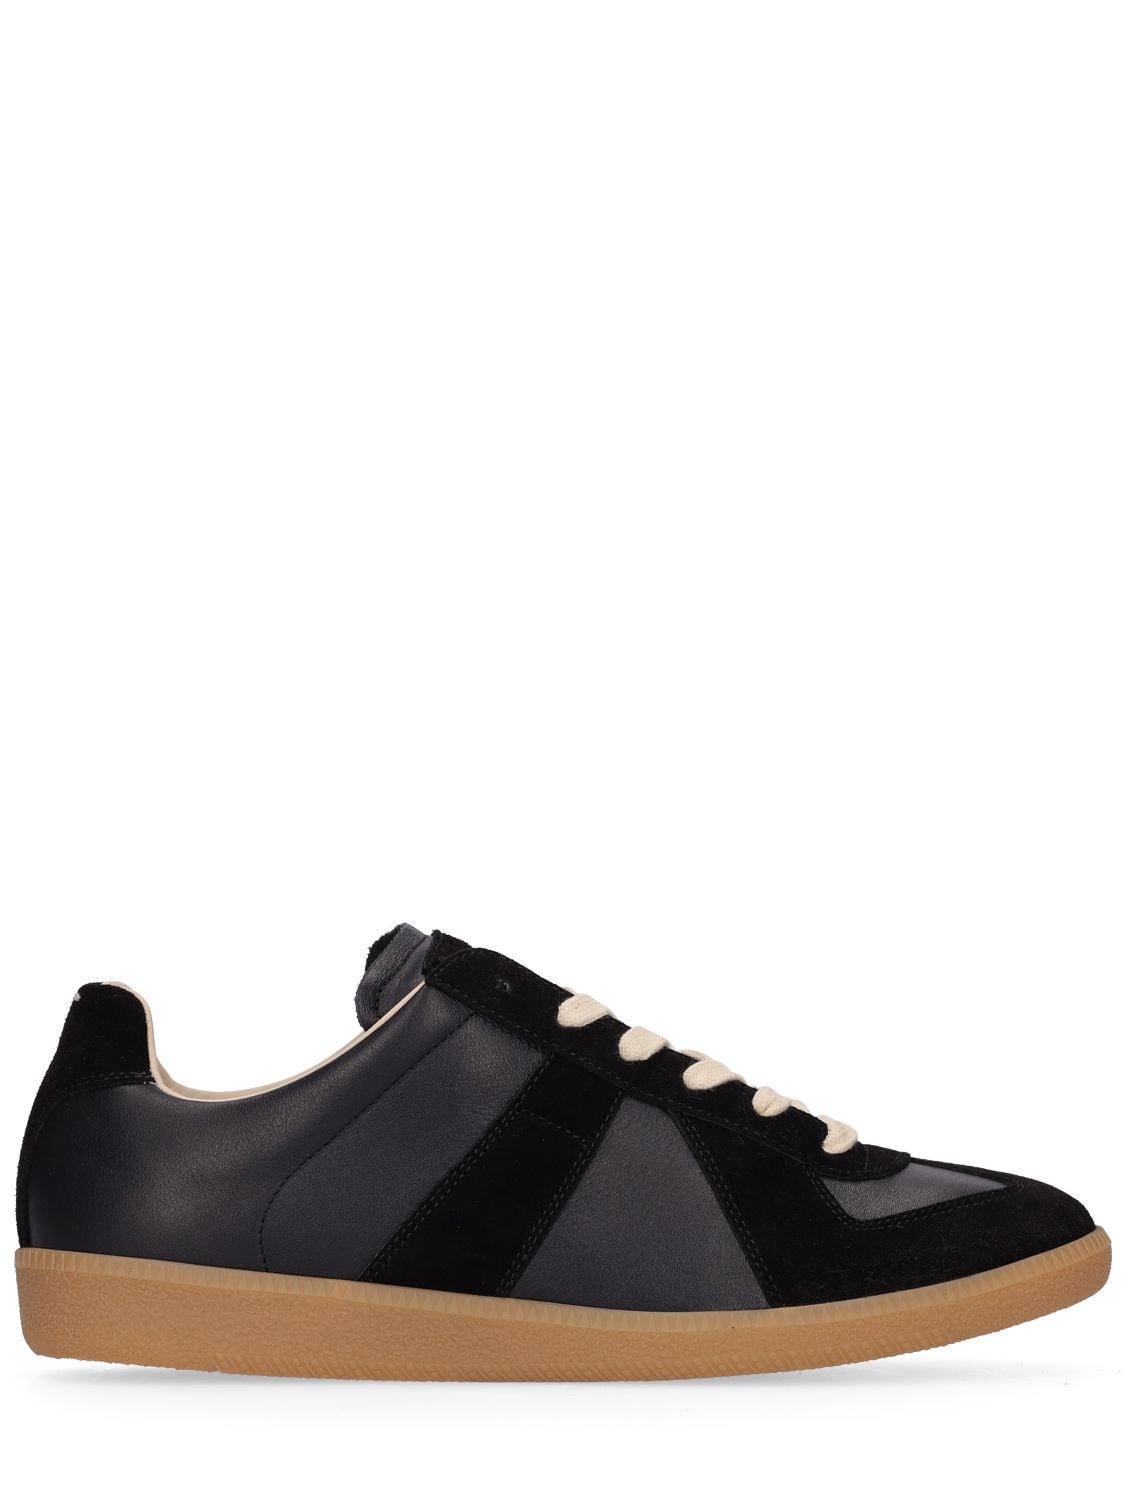 MAISON MARGIELA REPLICA LEATHER & SUEDE LOW TOP SNEAKERS